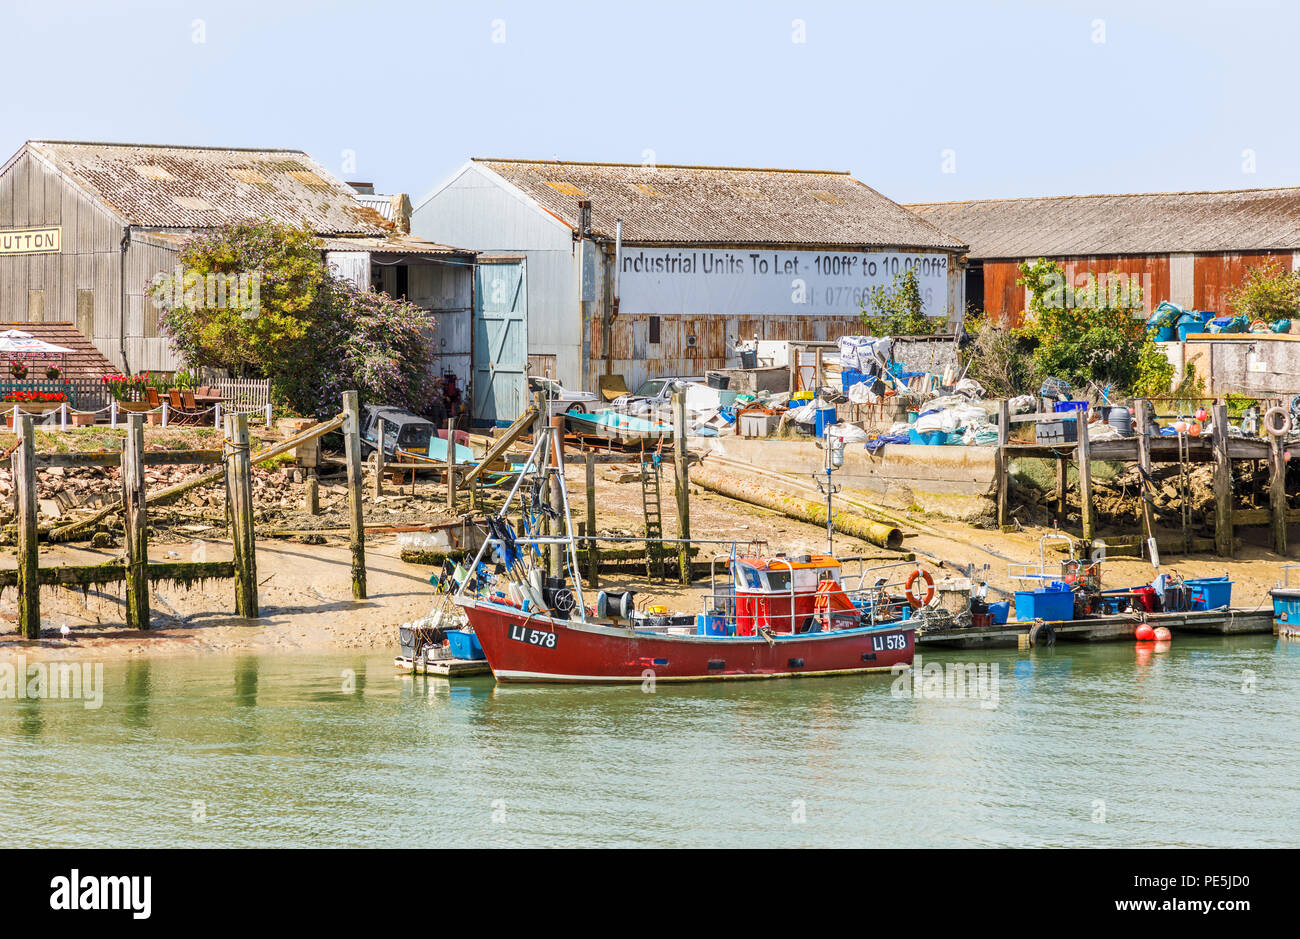 Red fishing boat moored by industrial units on the riverbank on the West Beach side of the River Arun estuary, Littlehampton, south coast West Sussex Stock Photo